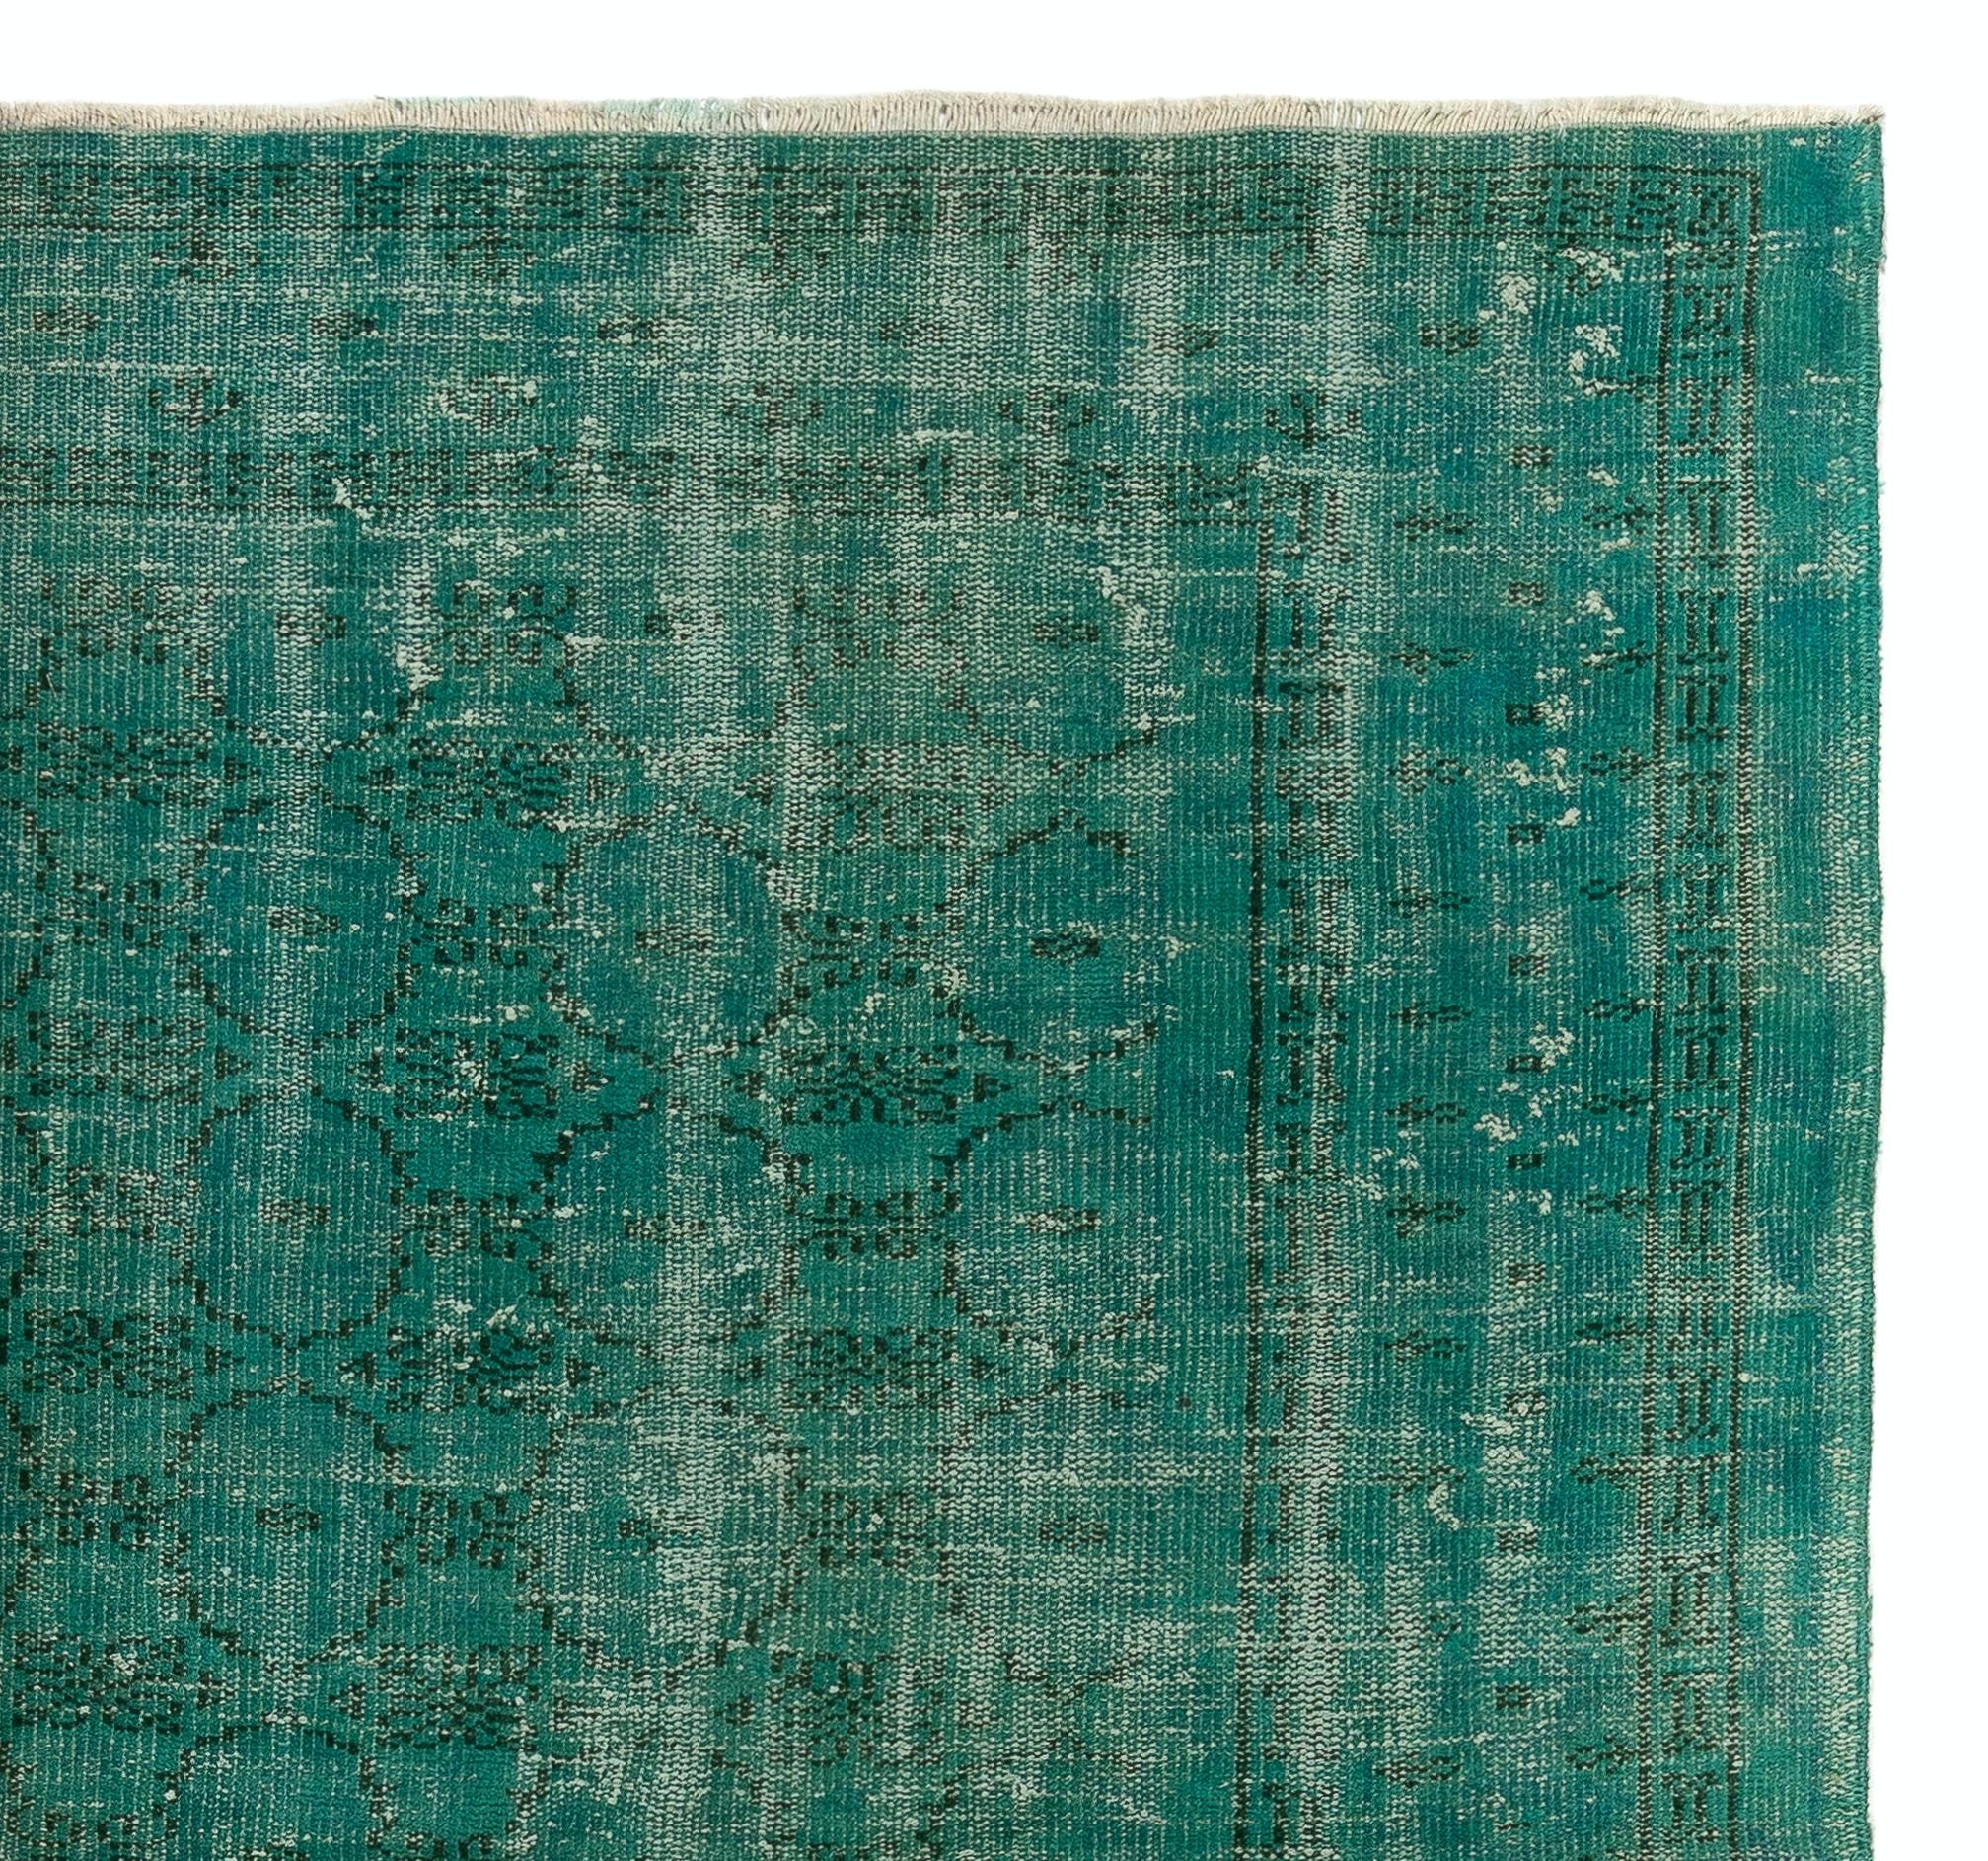 Hand-Woven 7.2x9.6 Ft Distressed Vintage Turkish Rug Re-Dyed in Teal Color for Modern Homes